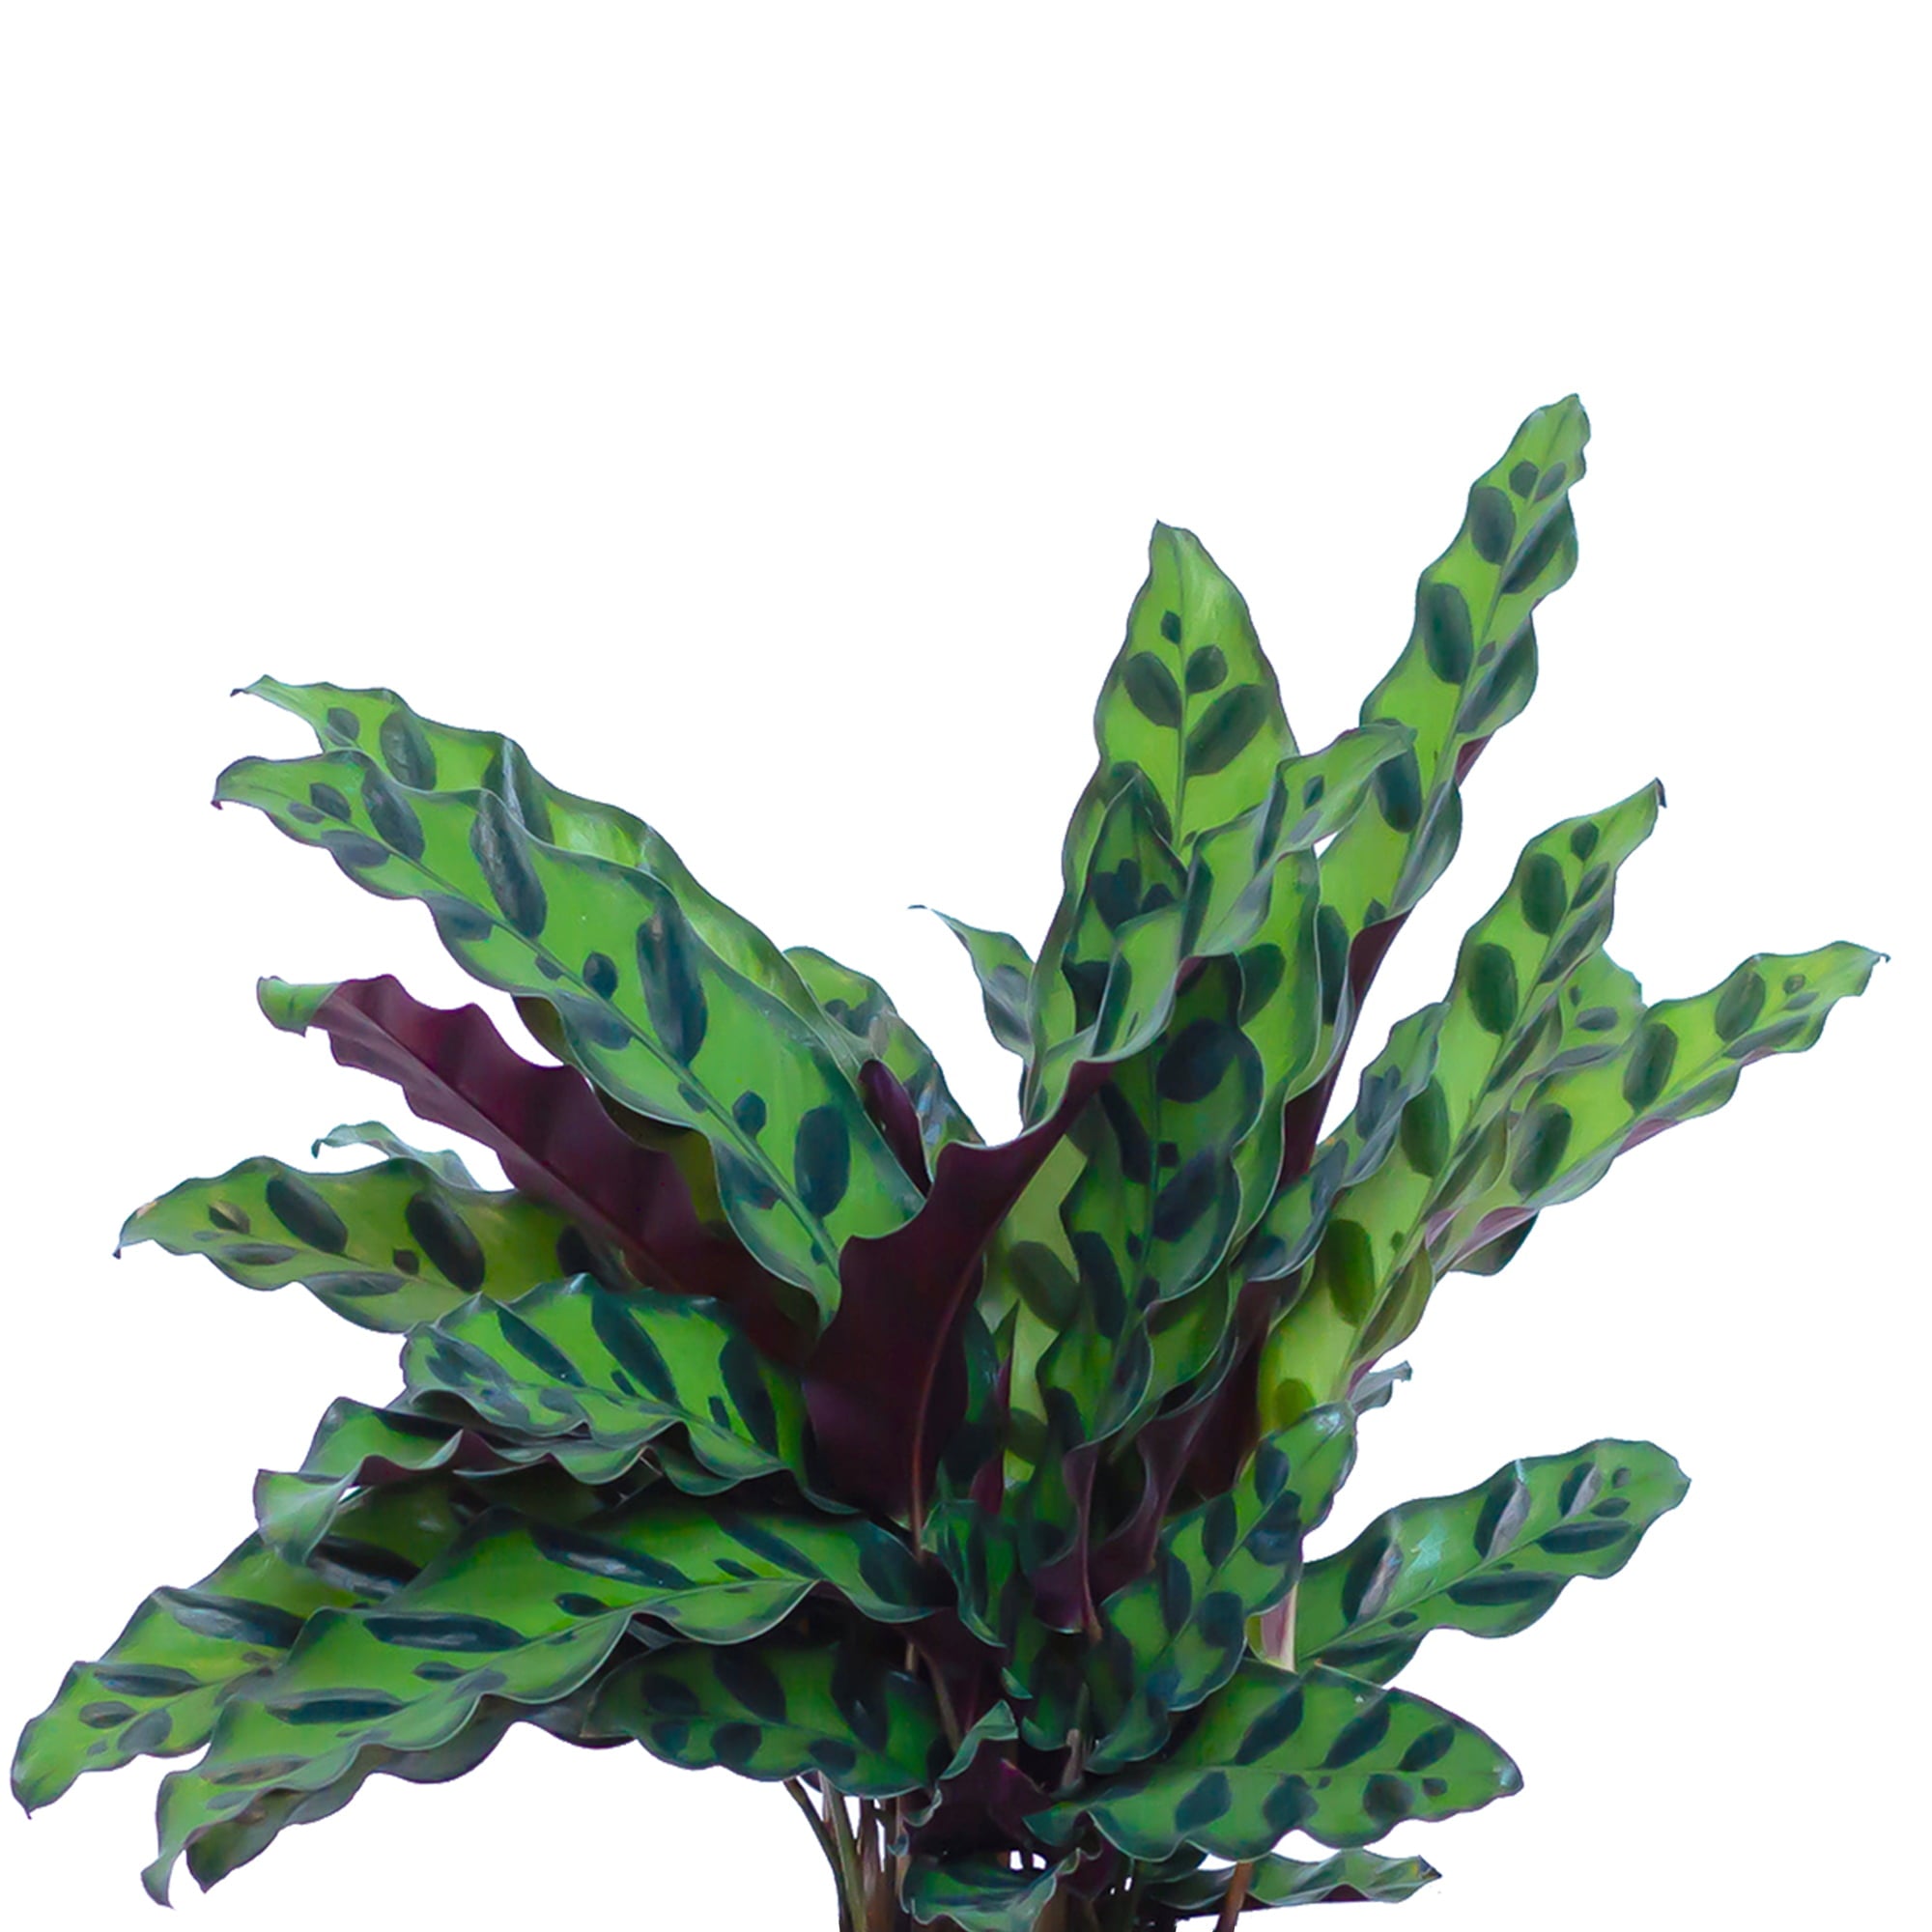 United Nursery Live Calathea Rattlesnake Plant 12-14 Inches Tall in 6 inch Grower